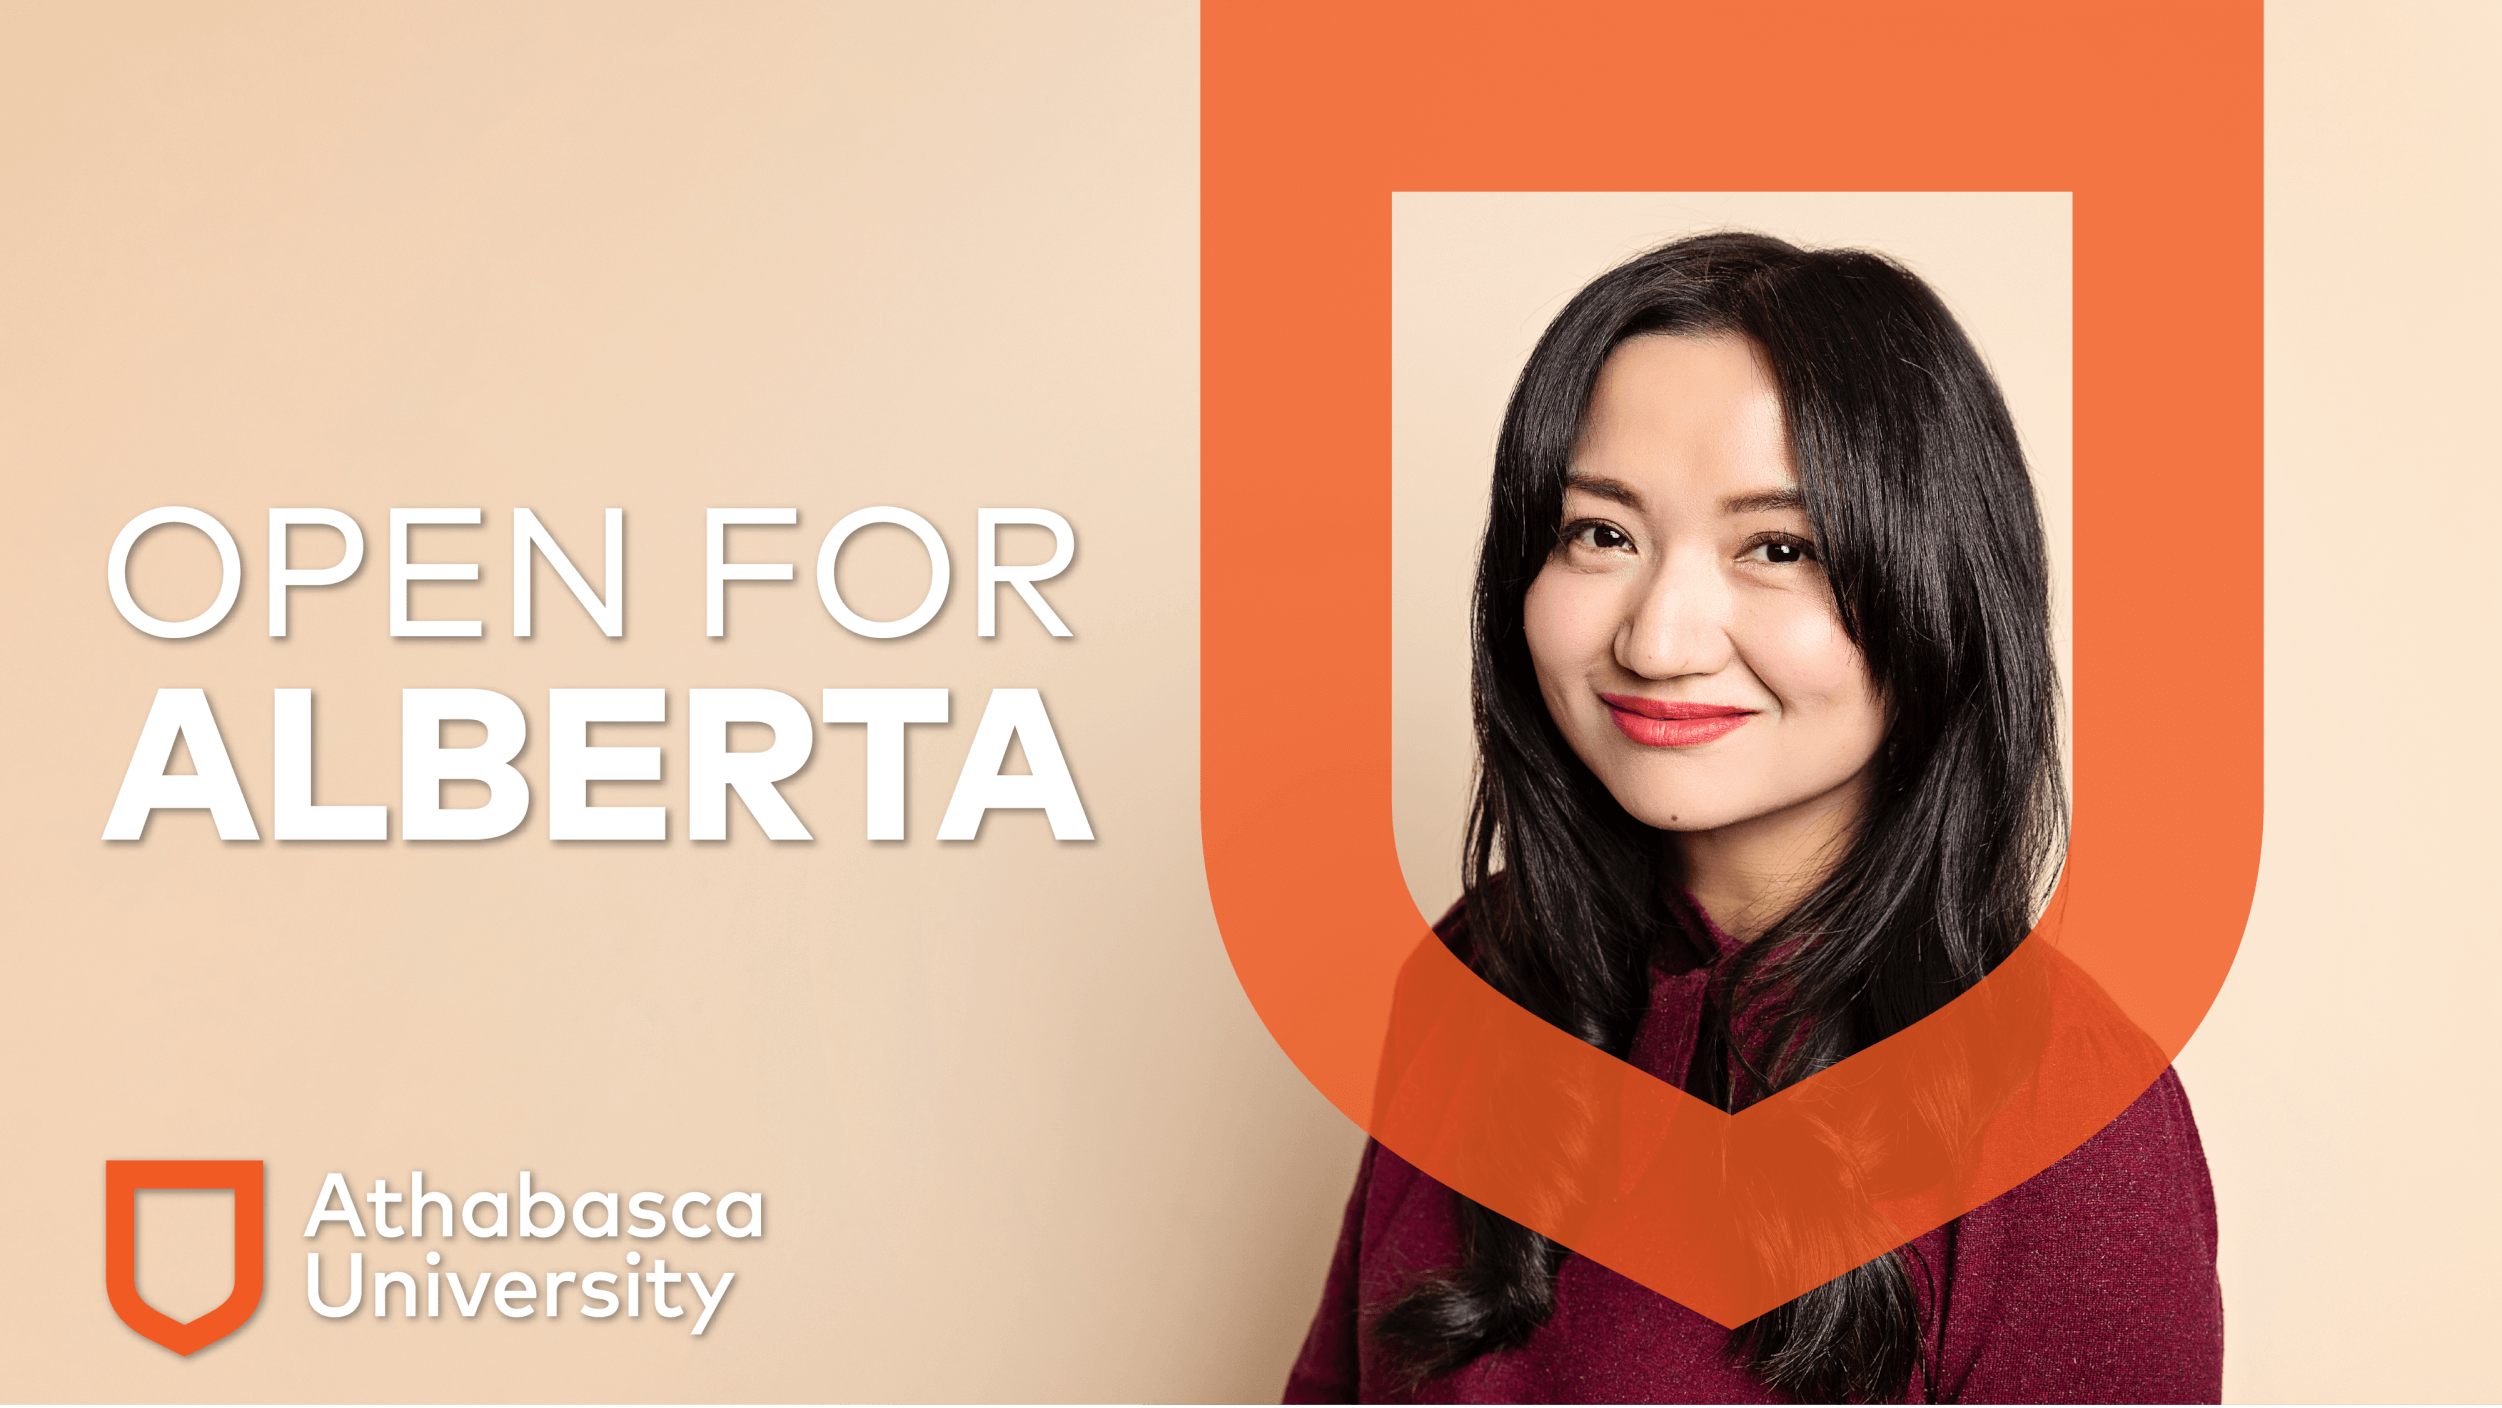 Athabasca University MBA graduate Laurie Wang in front of plain yellow/brown background with Open for Alberta branding.